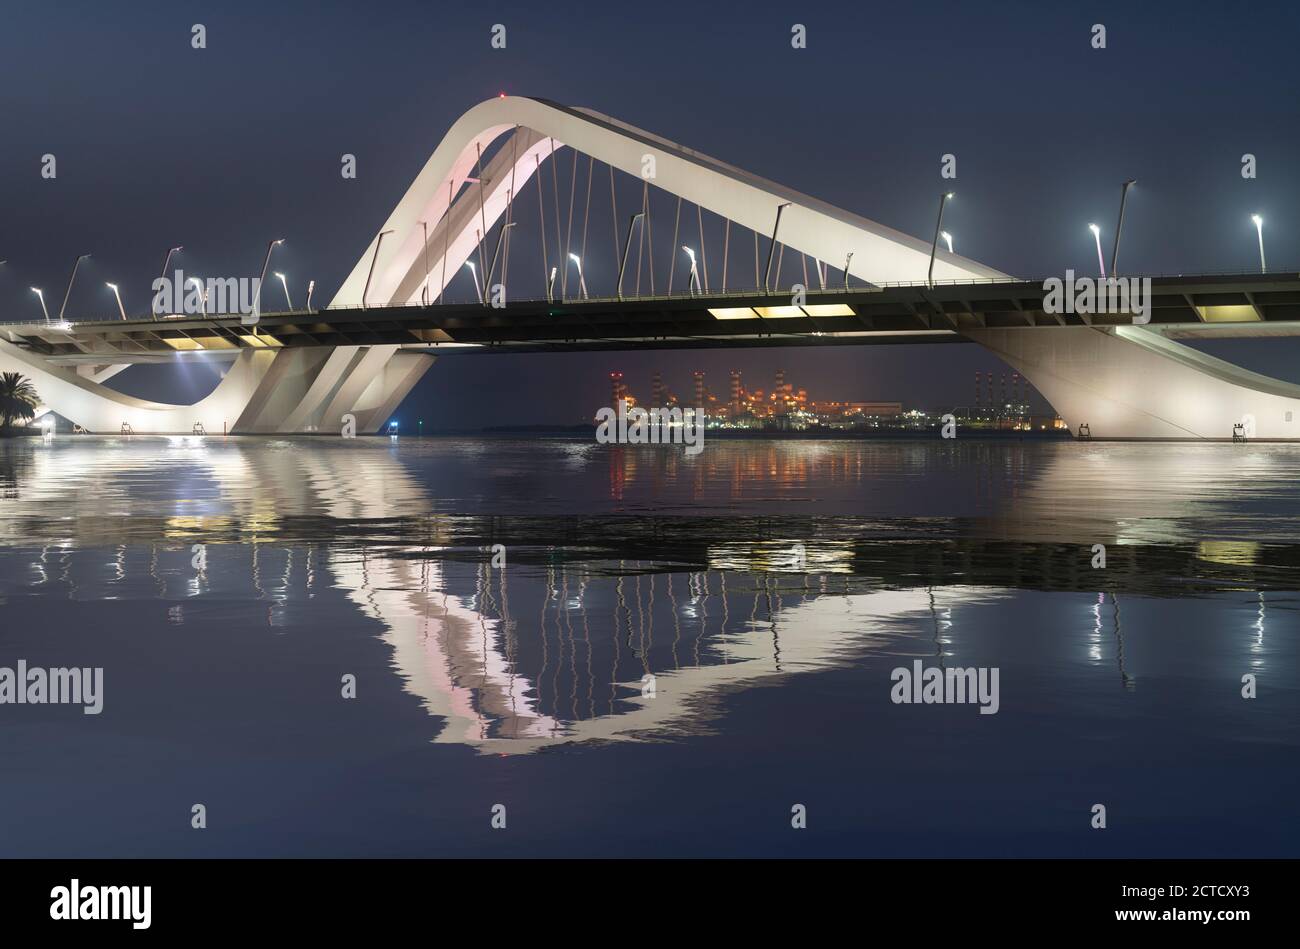 A night shot of the Sheikh Zayed Bridge, Abu Dhabi completed in 2010. Stock Photo